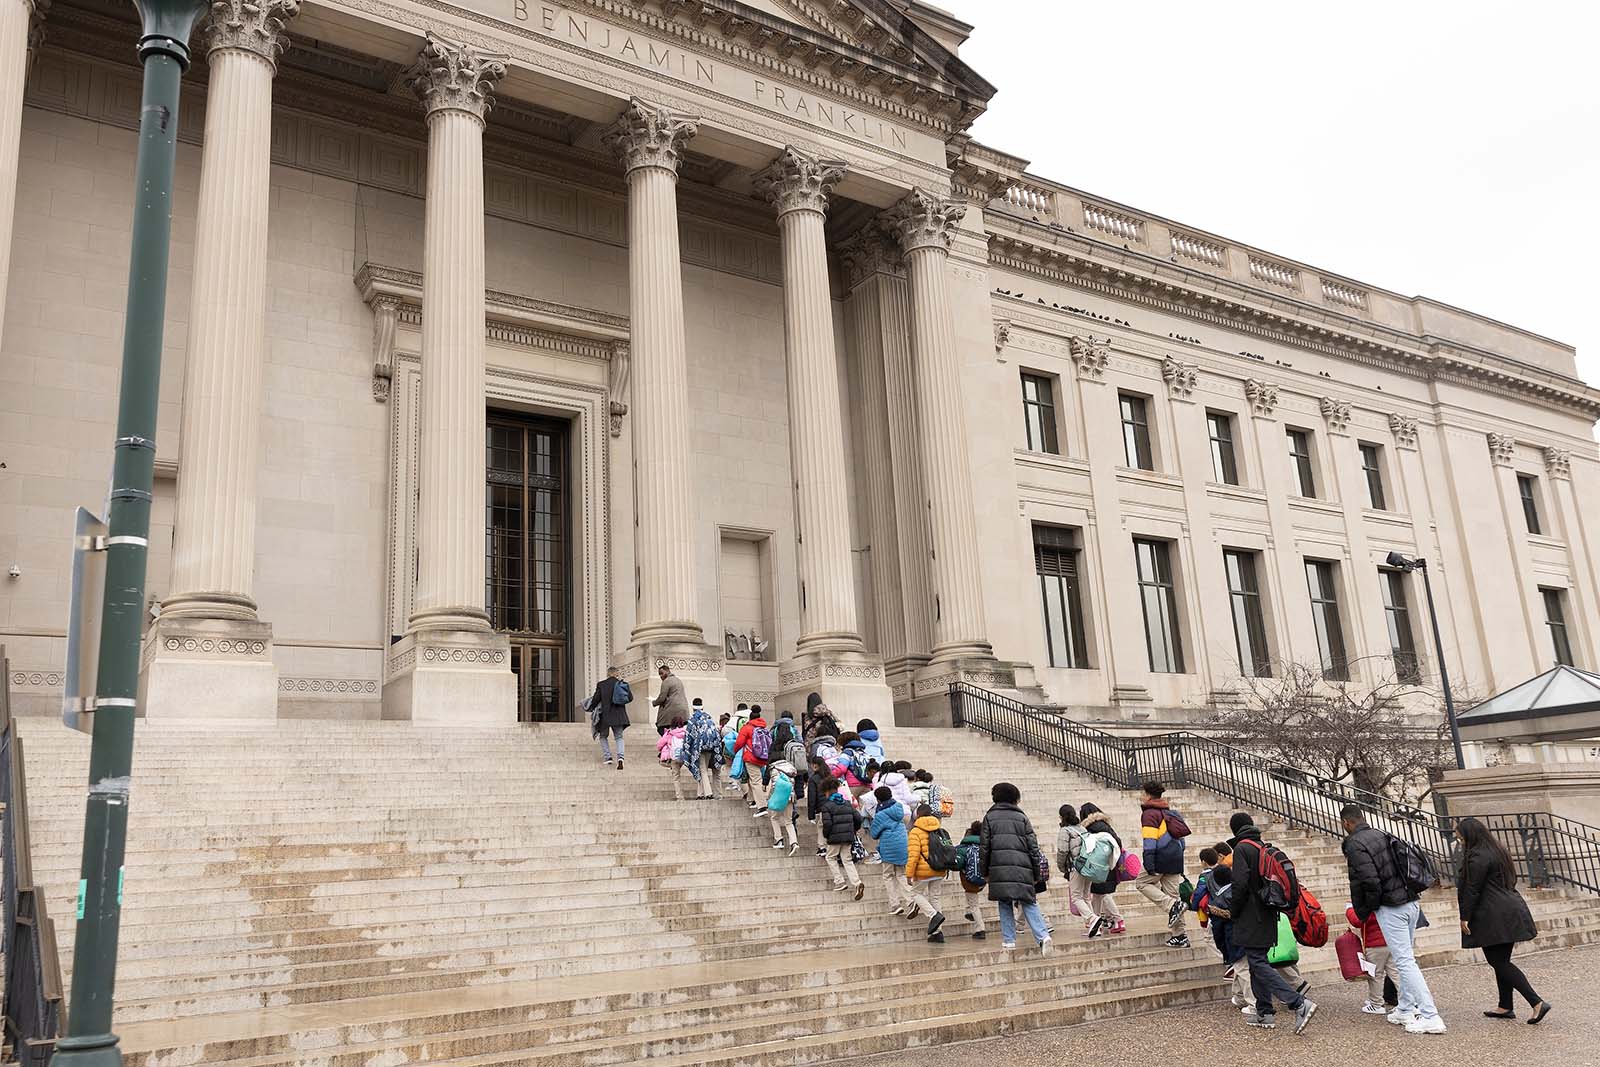 The kids from Abbott Elementary climb the stairs to the Franklin Institute